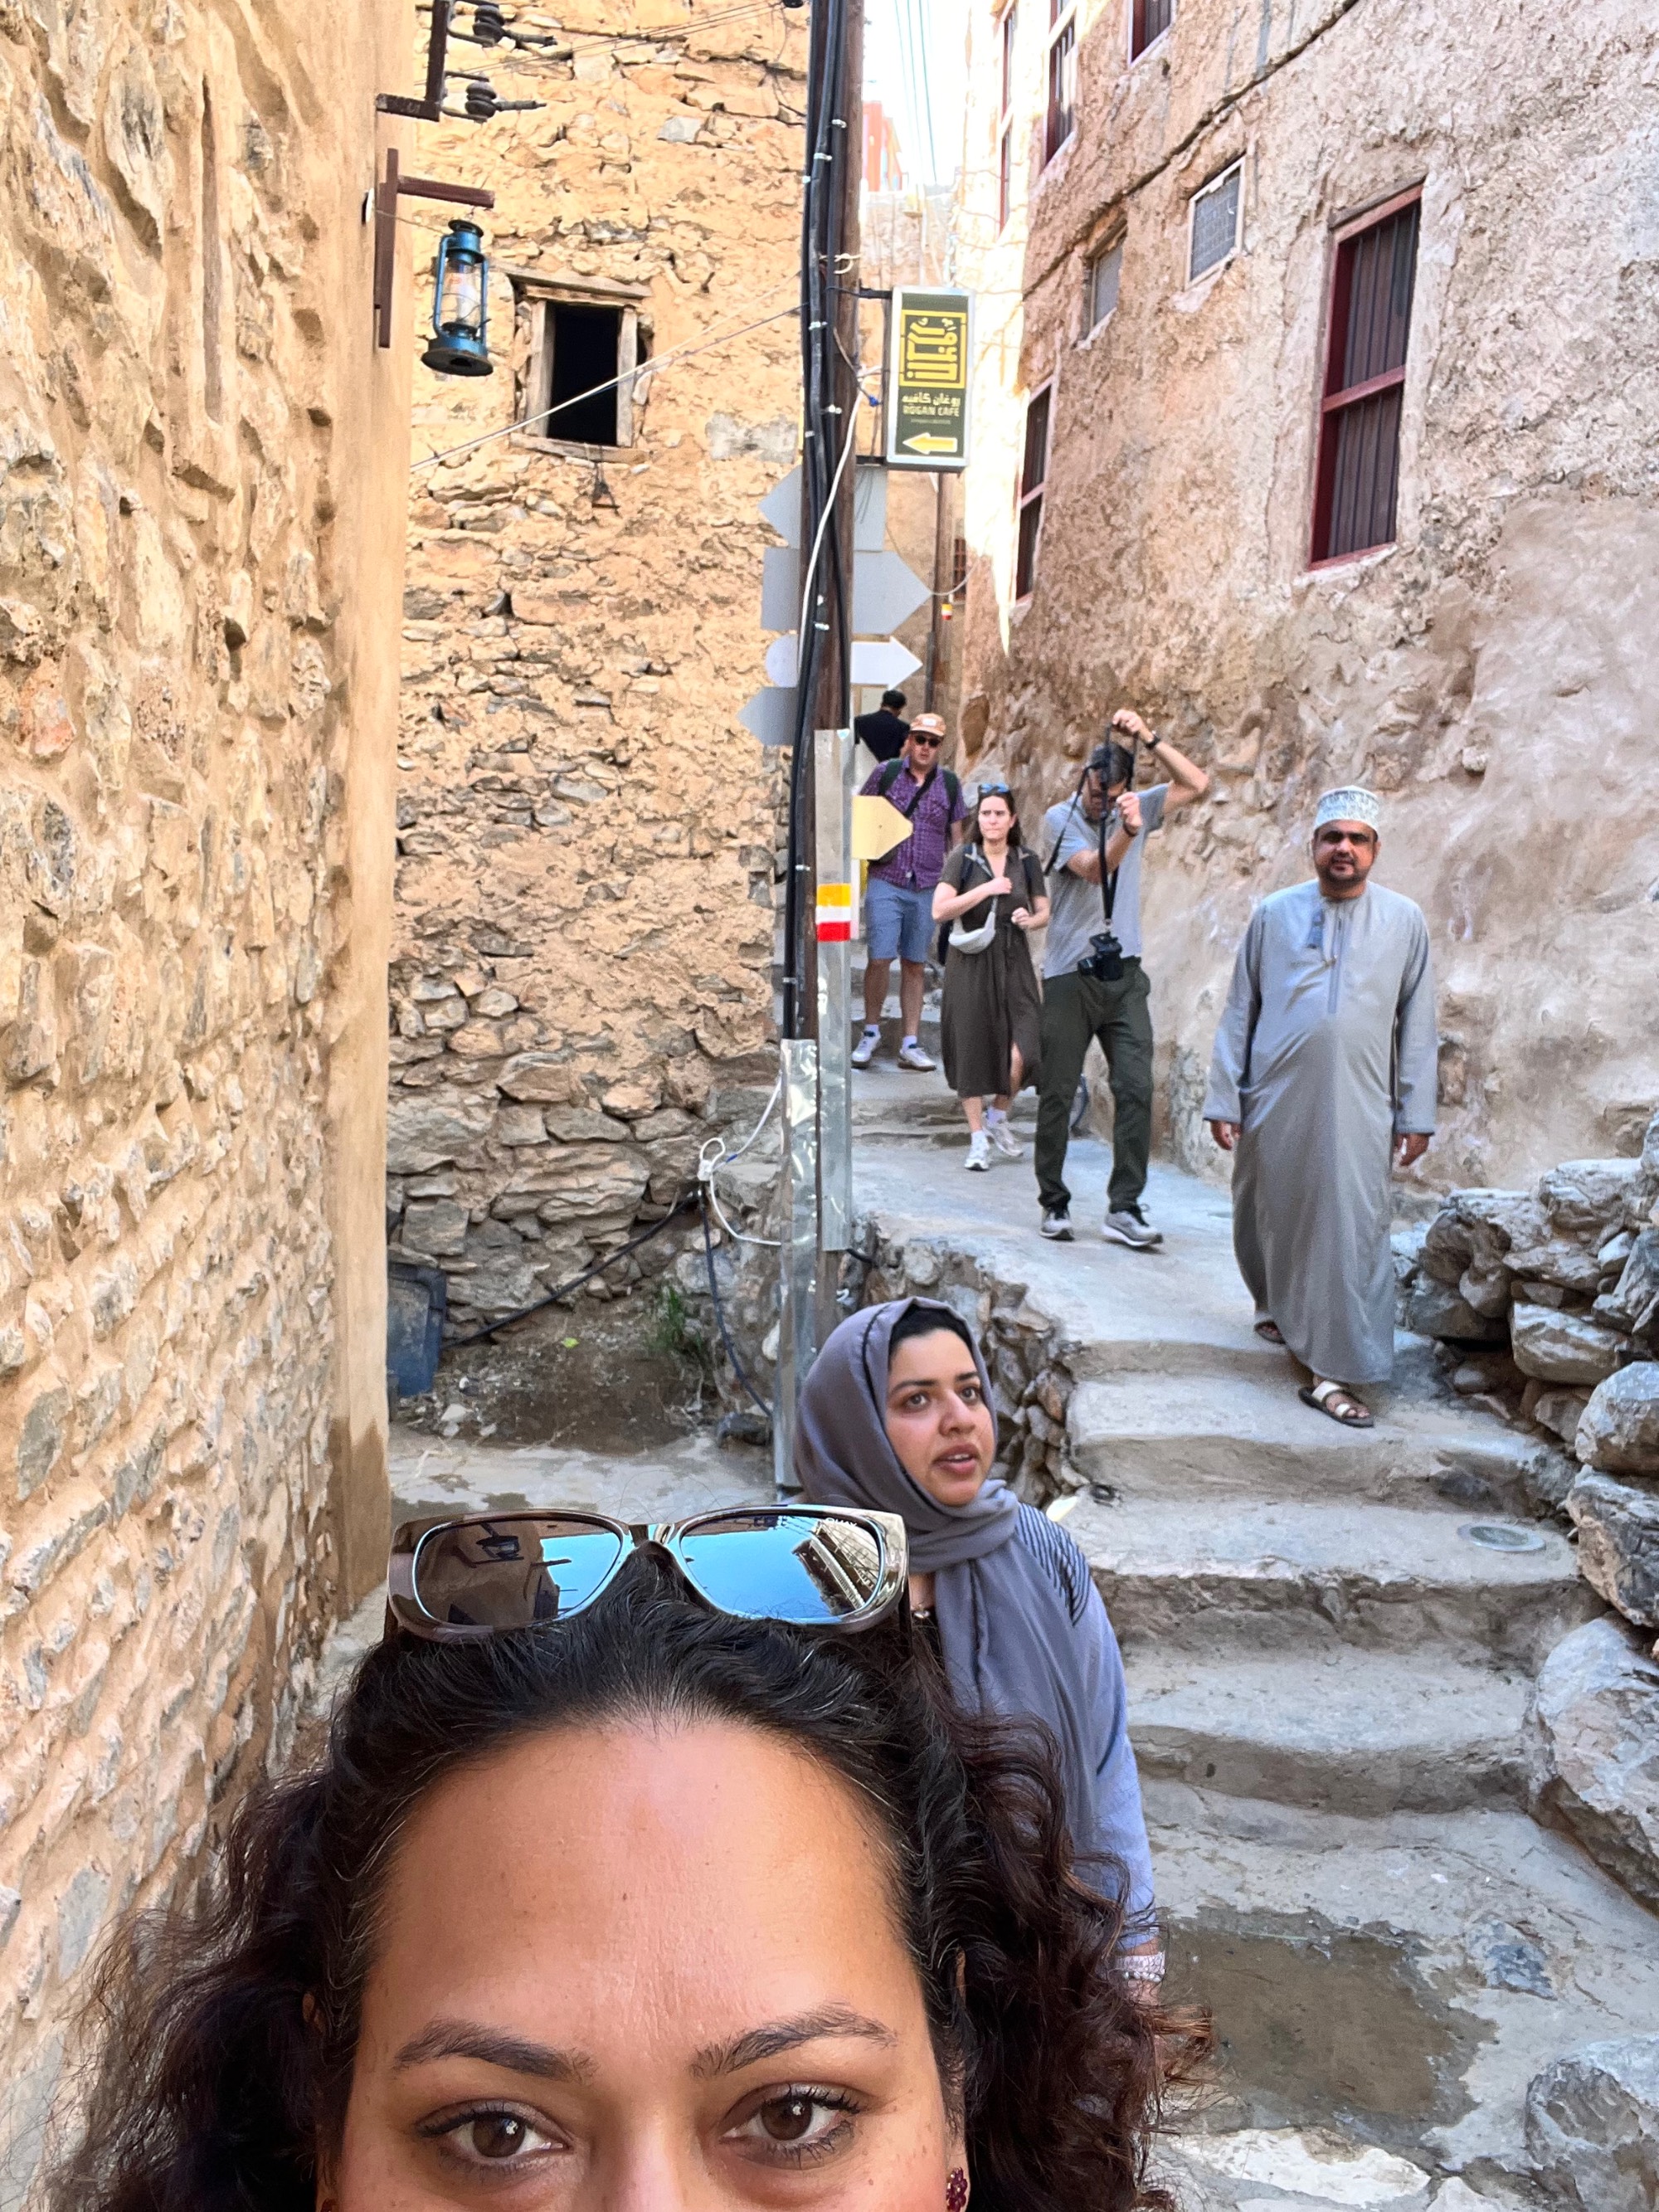 Photo of people in an alleyway in an old city